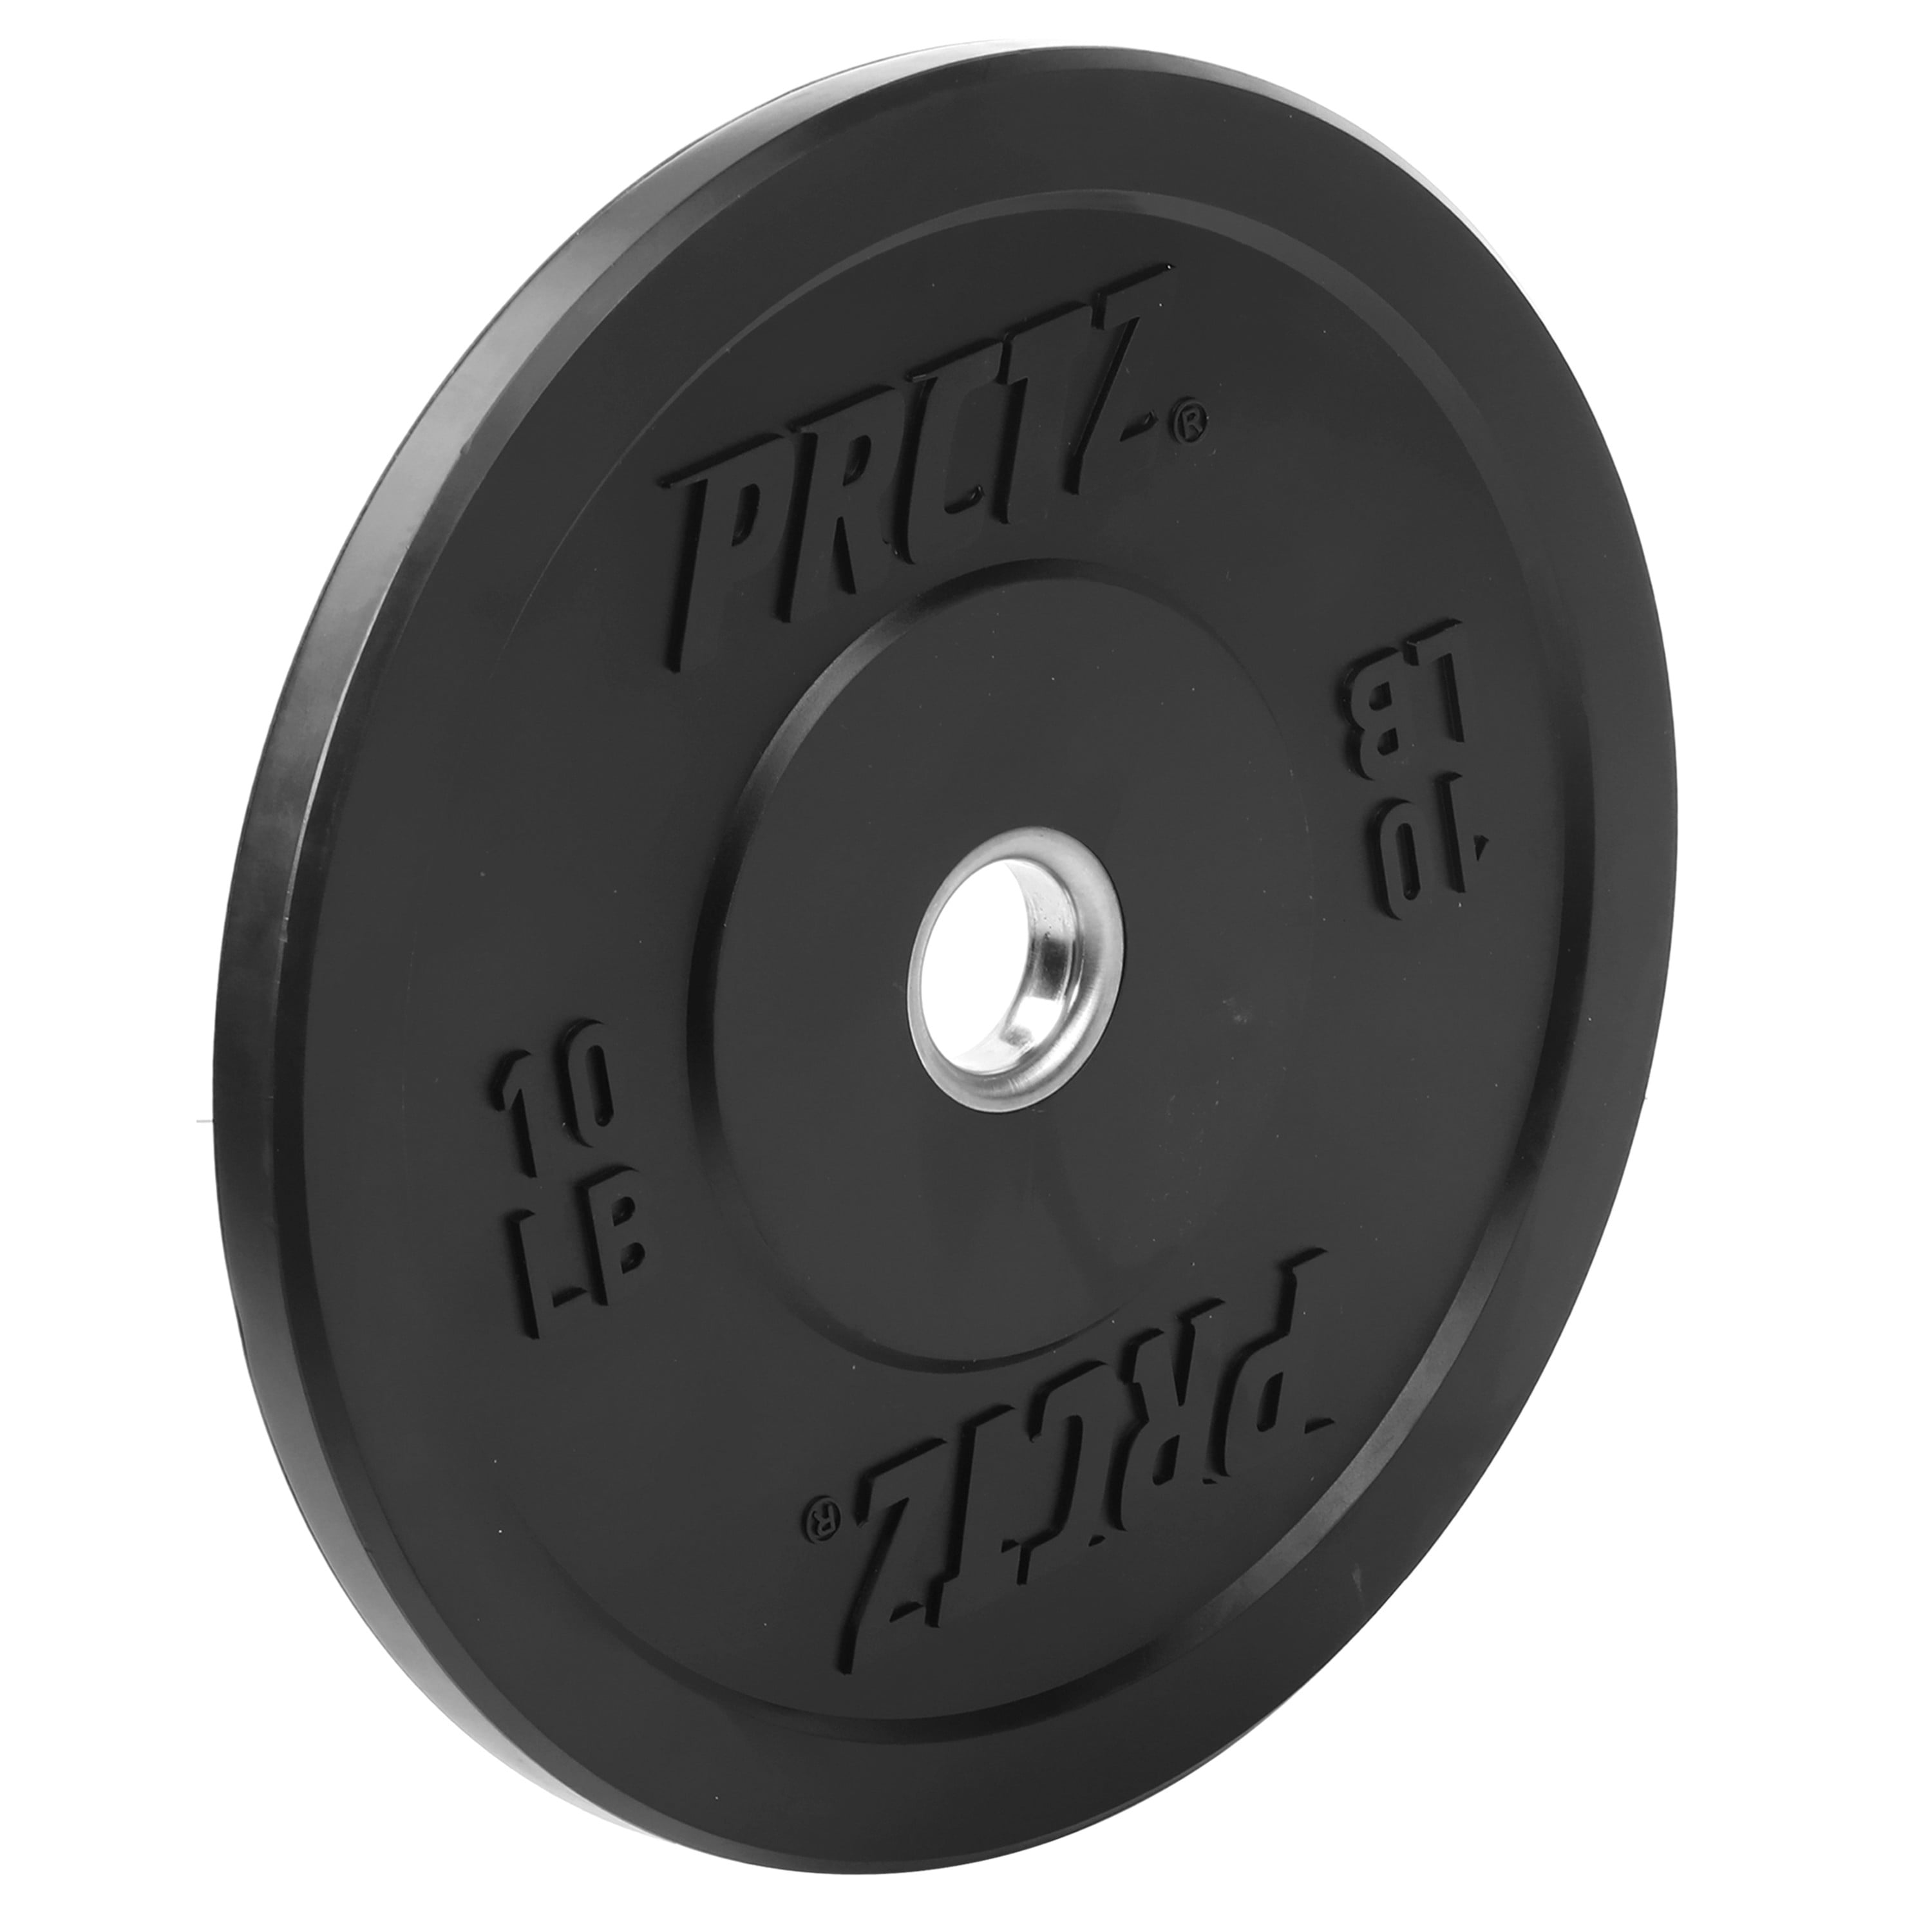 Ideal for Cross-Training - 10LB / 15LB / 25LB / 35LB / 45LB Weightlifting HD Bumper Plates 2 1 Rubber Weight Plate in Pounds for Olympic Barbells Fitness and Gym Weights One Single 